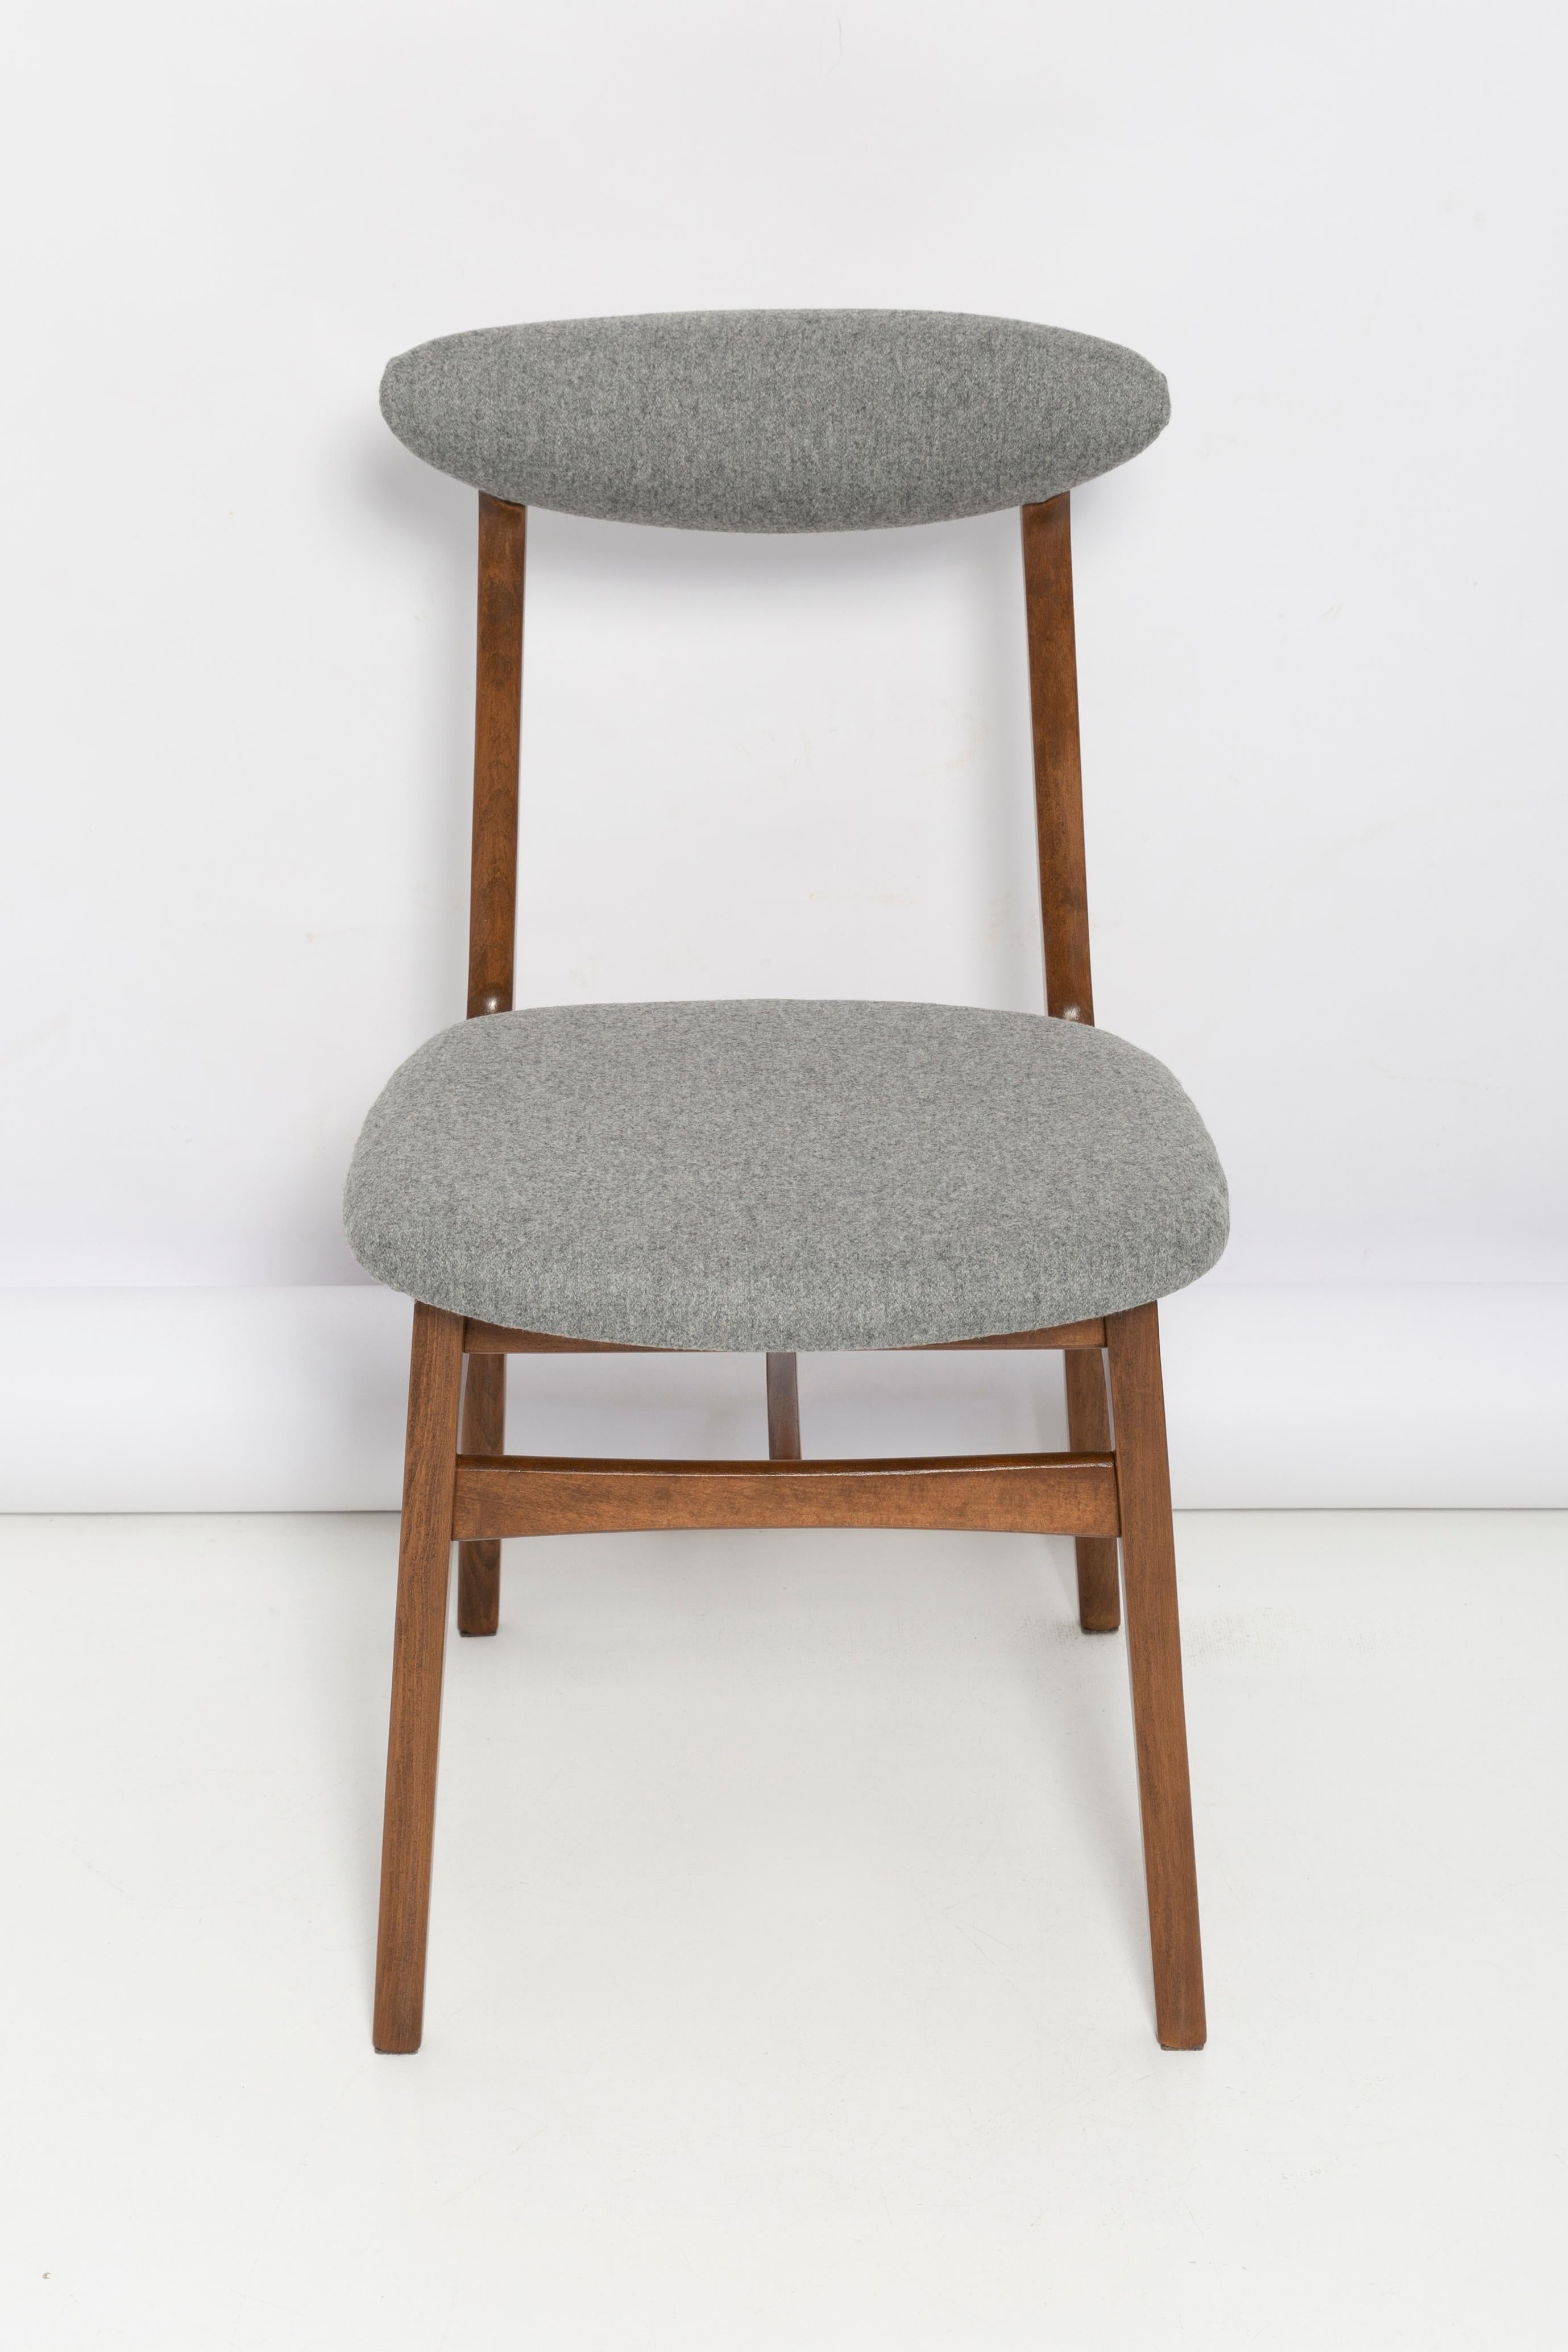 Set of Six Mid Century Gray Wool Chairs by Rajmund Halas, Poland, 1960s For Sale 4